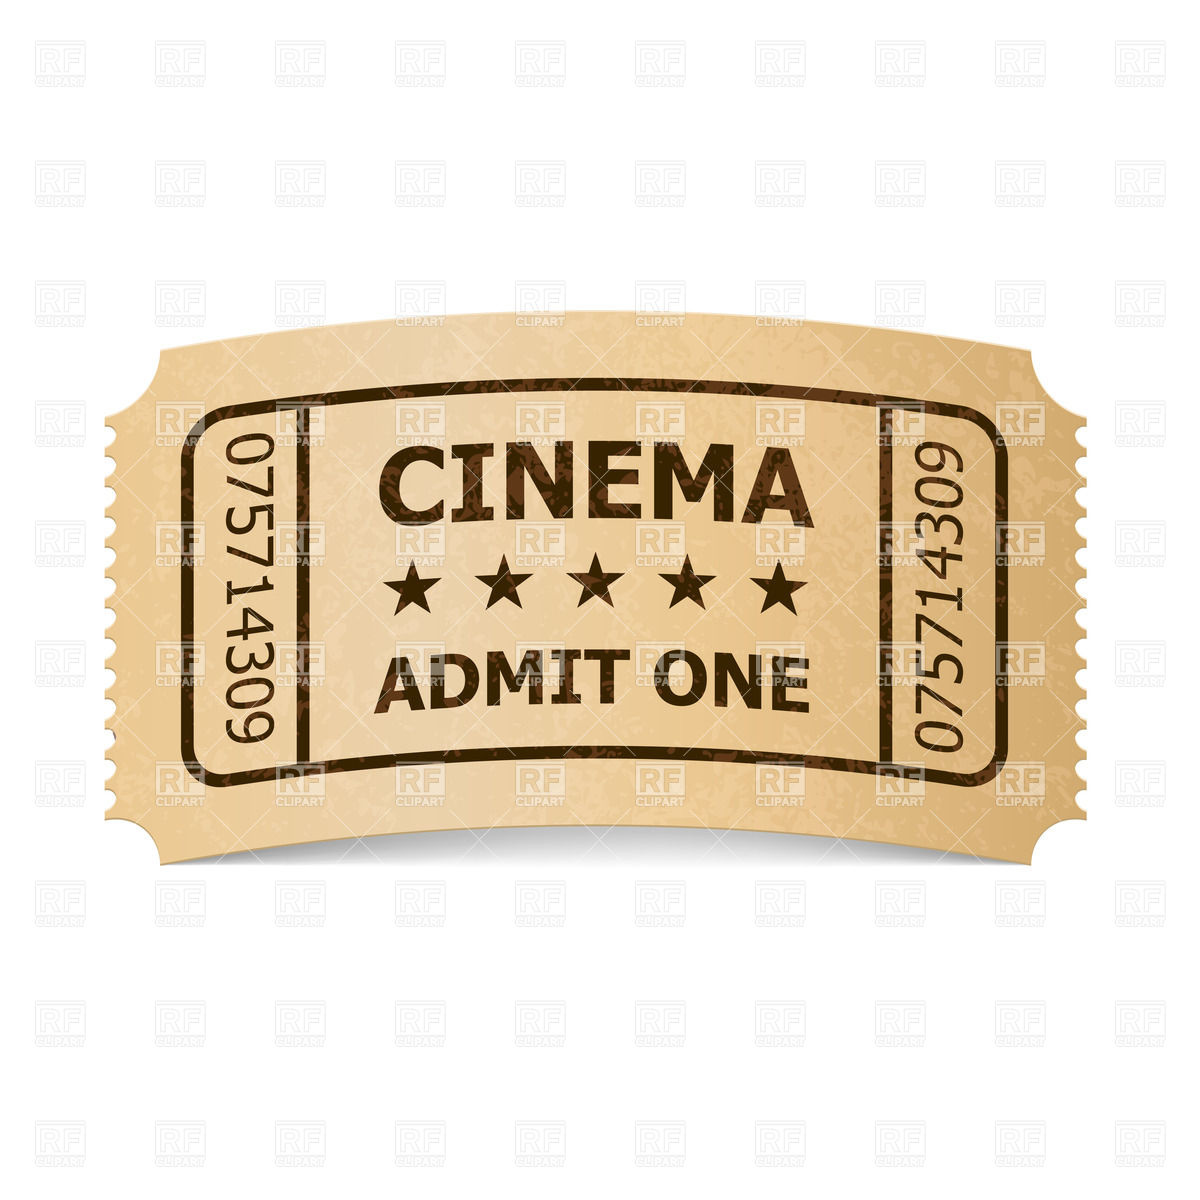 Retro Style Cinema Ticket Objects Download Royalty Free Vector Clip